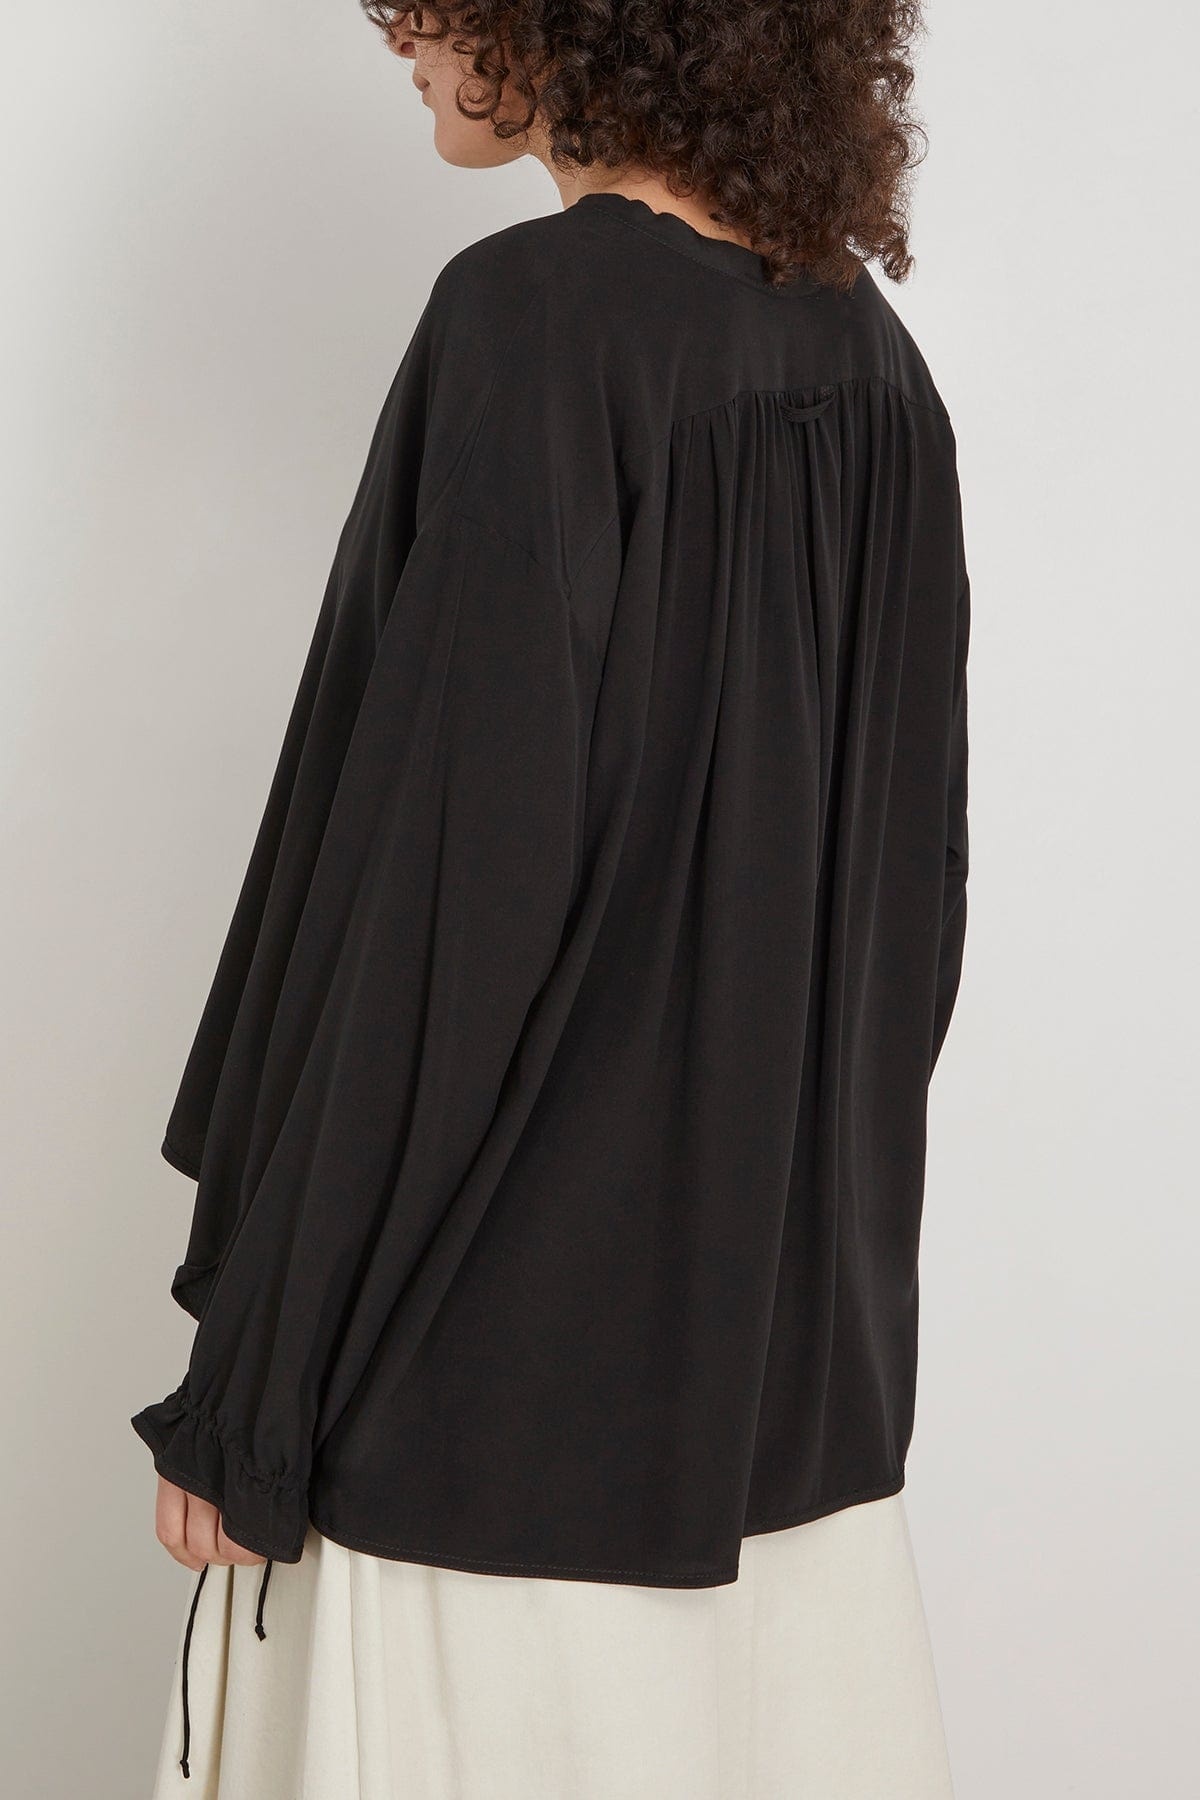 Sophisticated Volumes Blouse in Pure Black - 4